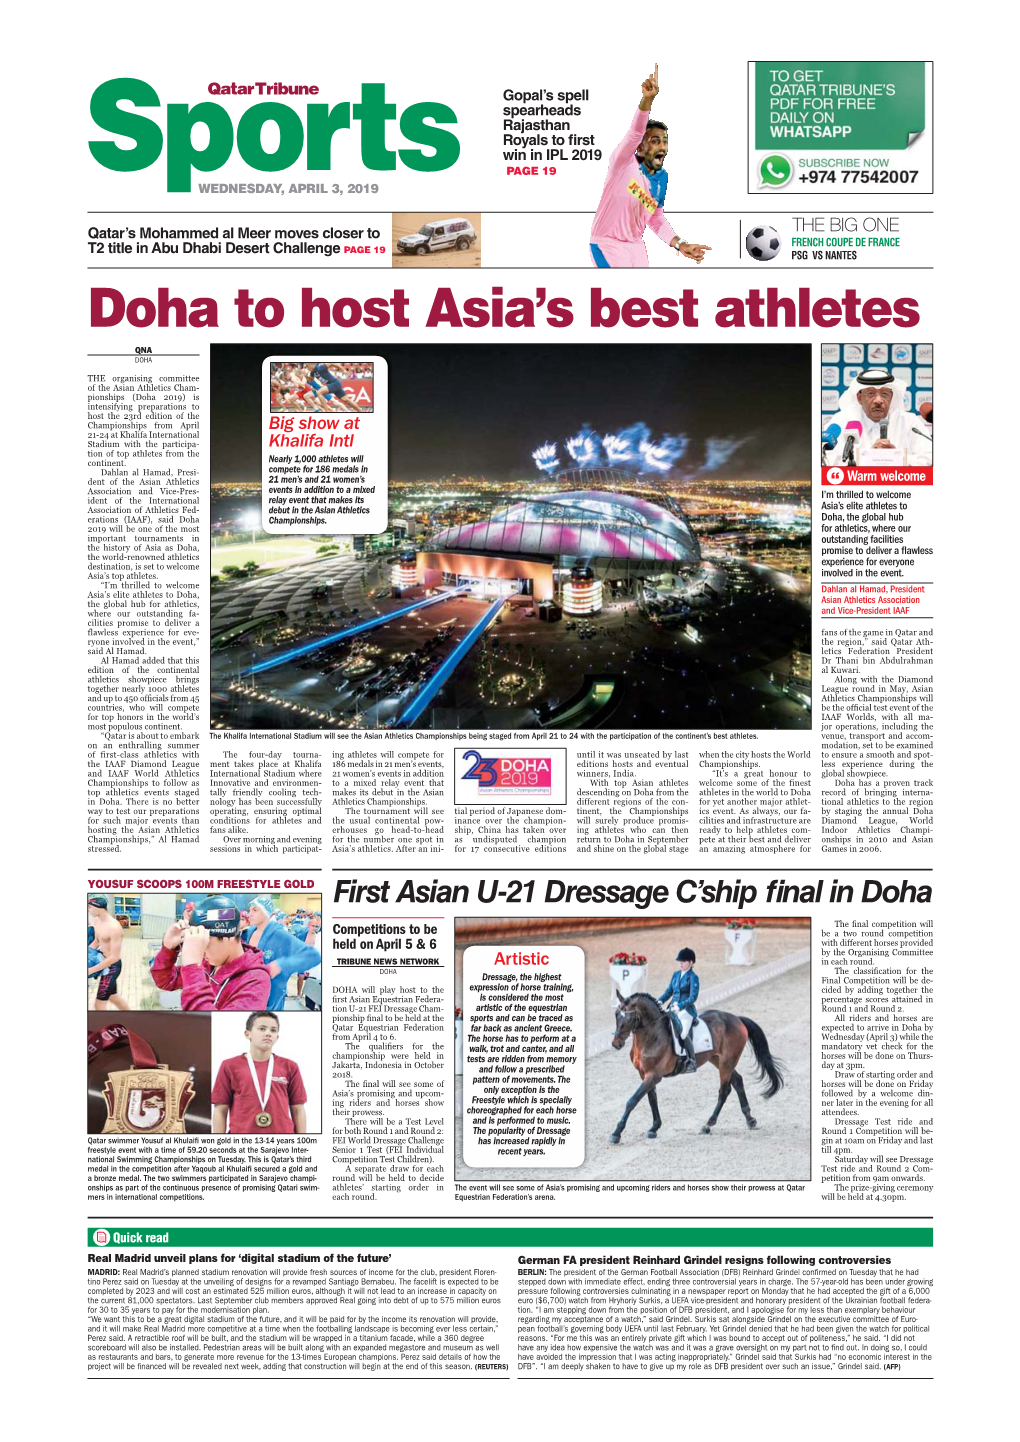 Doha to Host Asia's Best Athletes